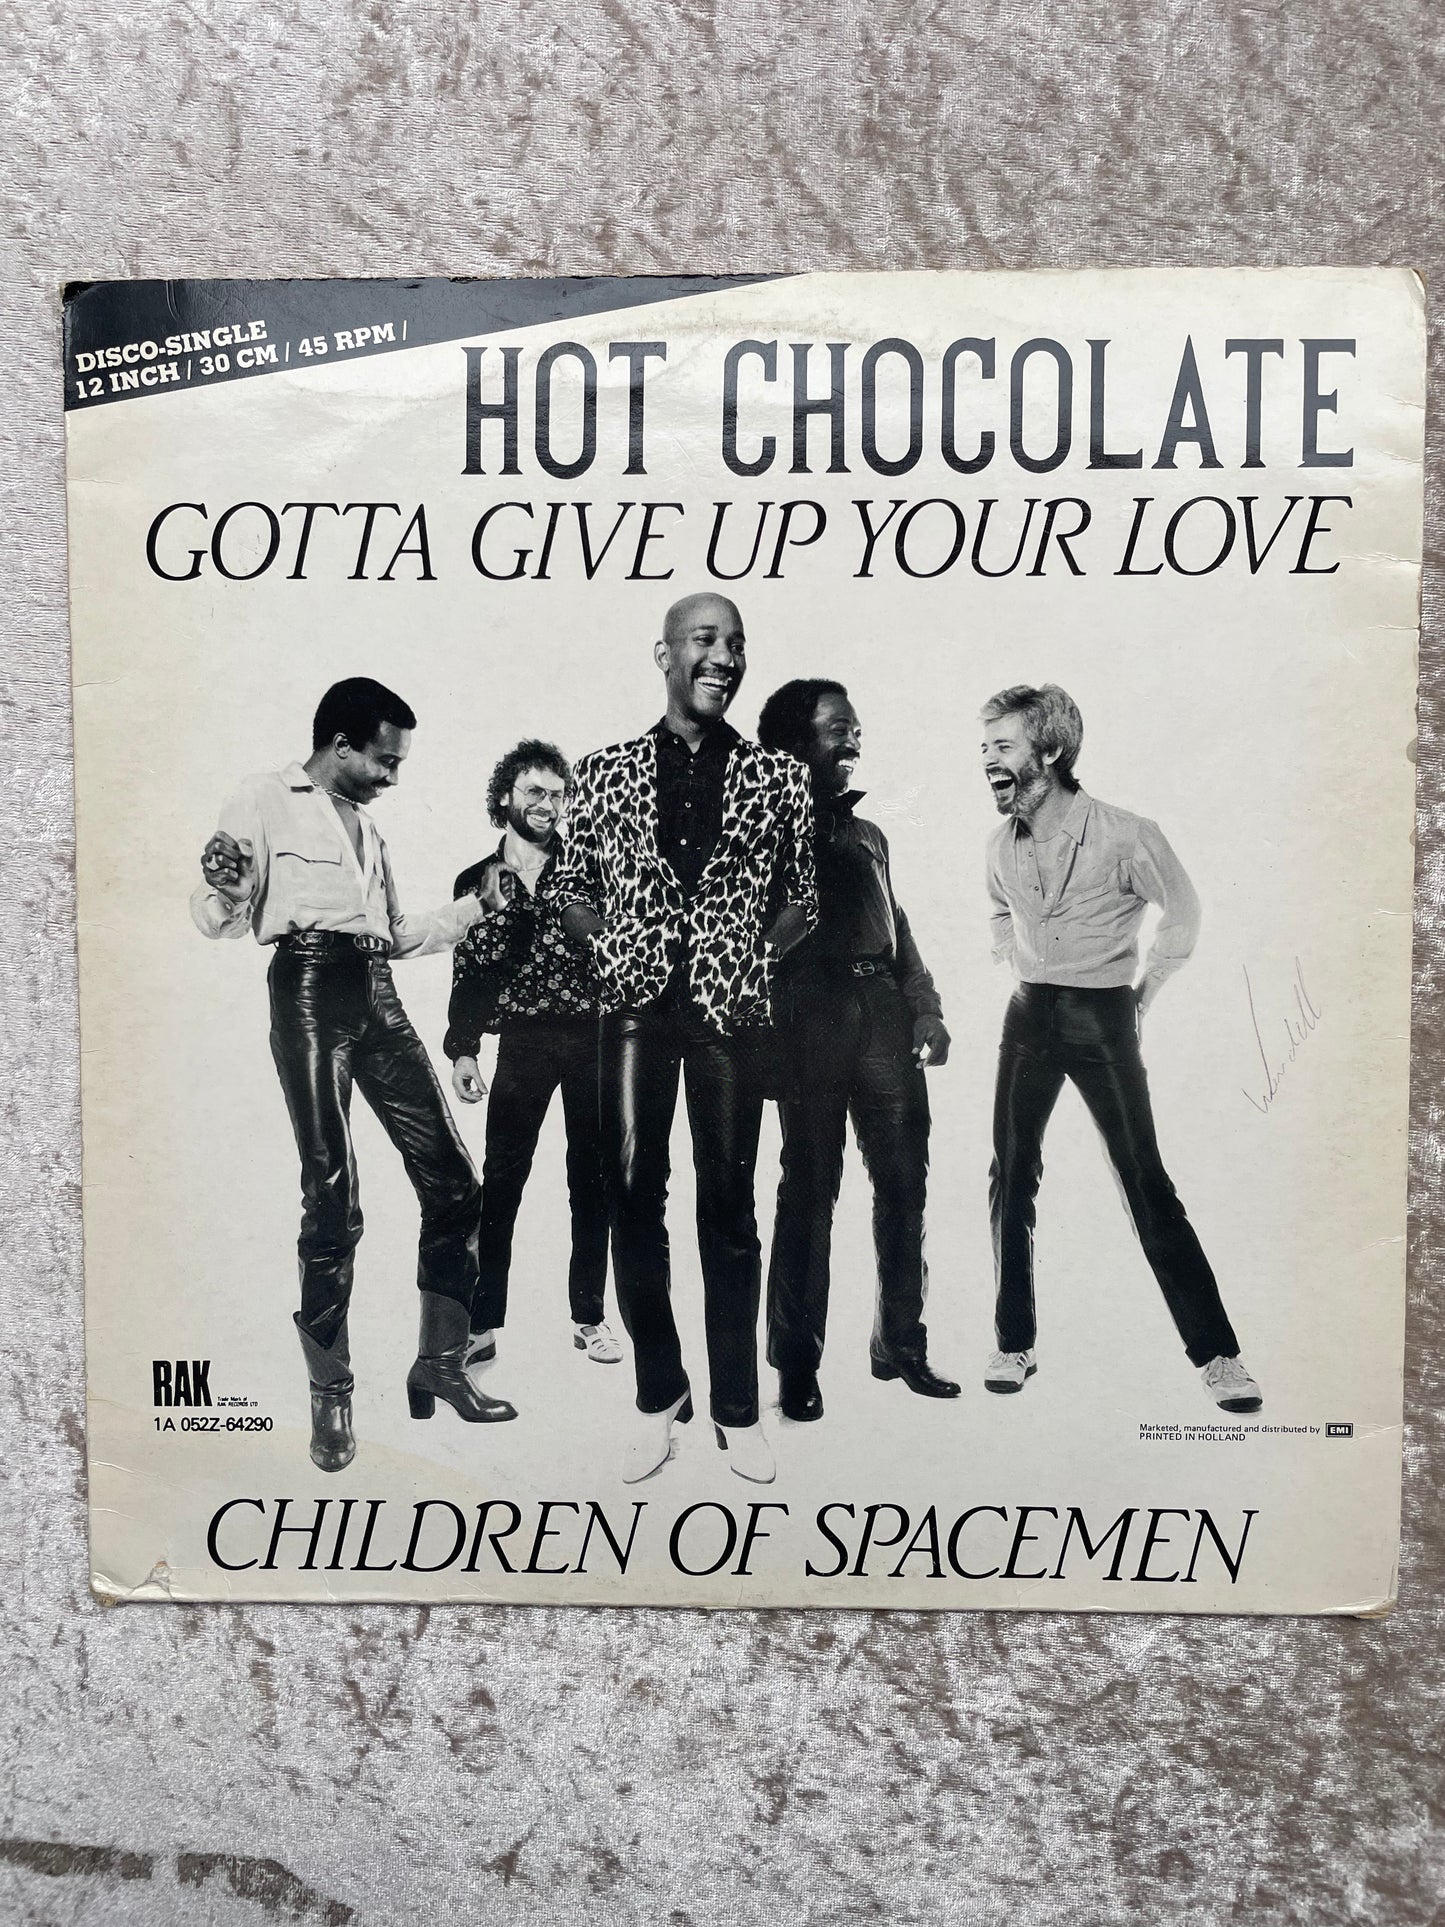 Vinyl Record LP Hot Chocolate Gotta Give Up Your Love 1981